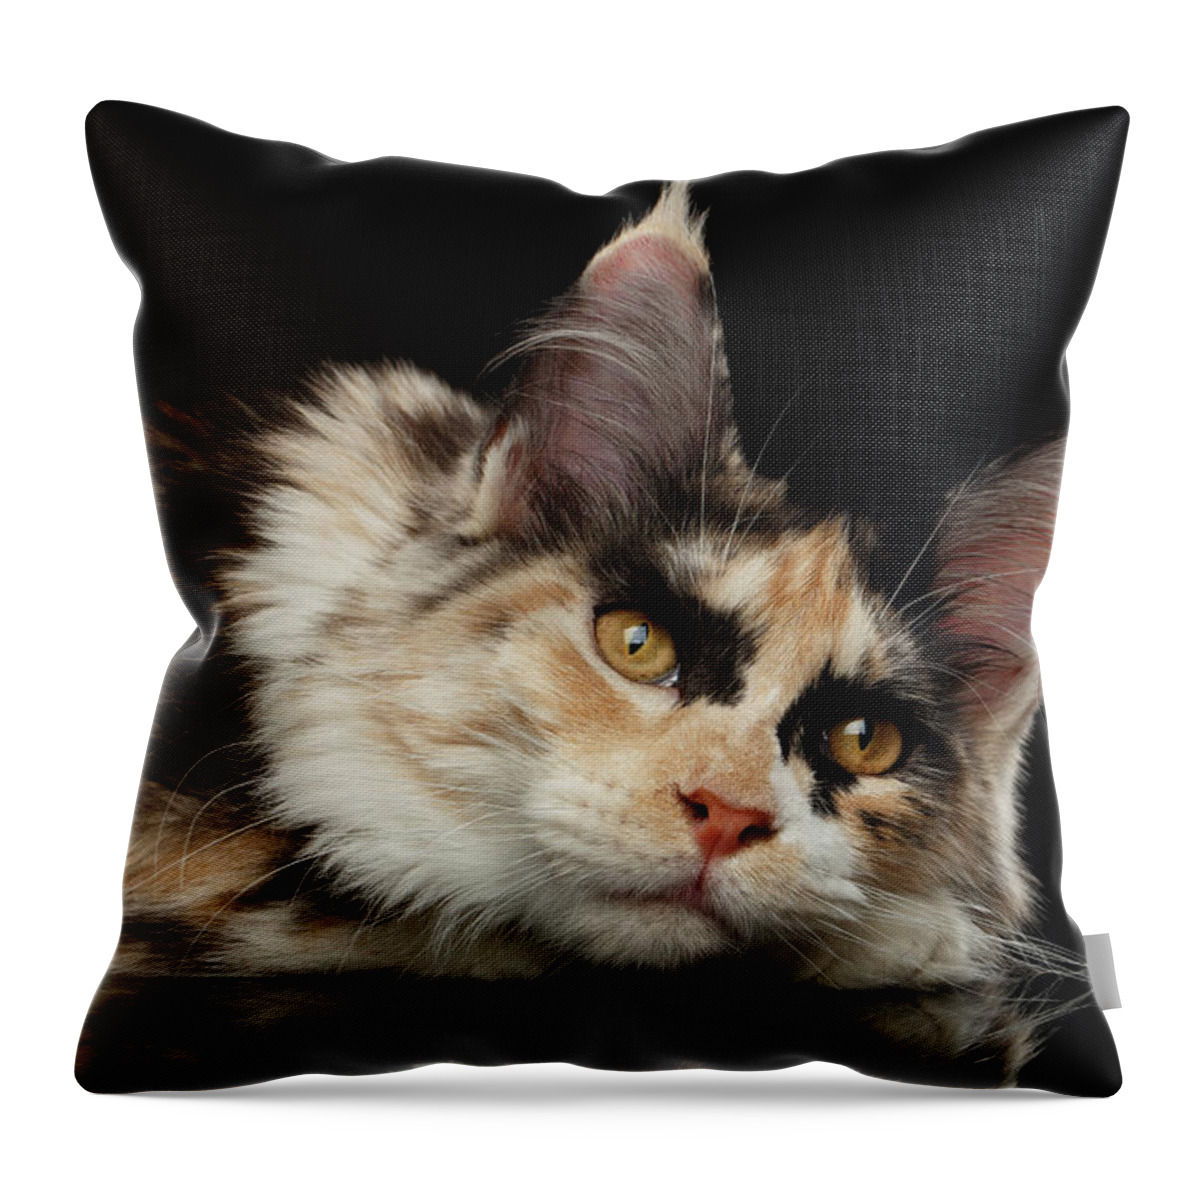 Tired Throw Pillow featuring the photograph Tired Maine Coon Cat lie on Black background by Sergey Taran